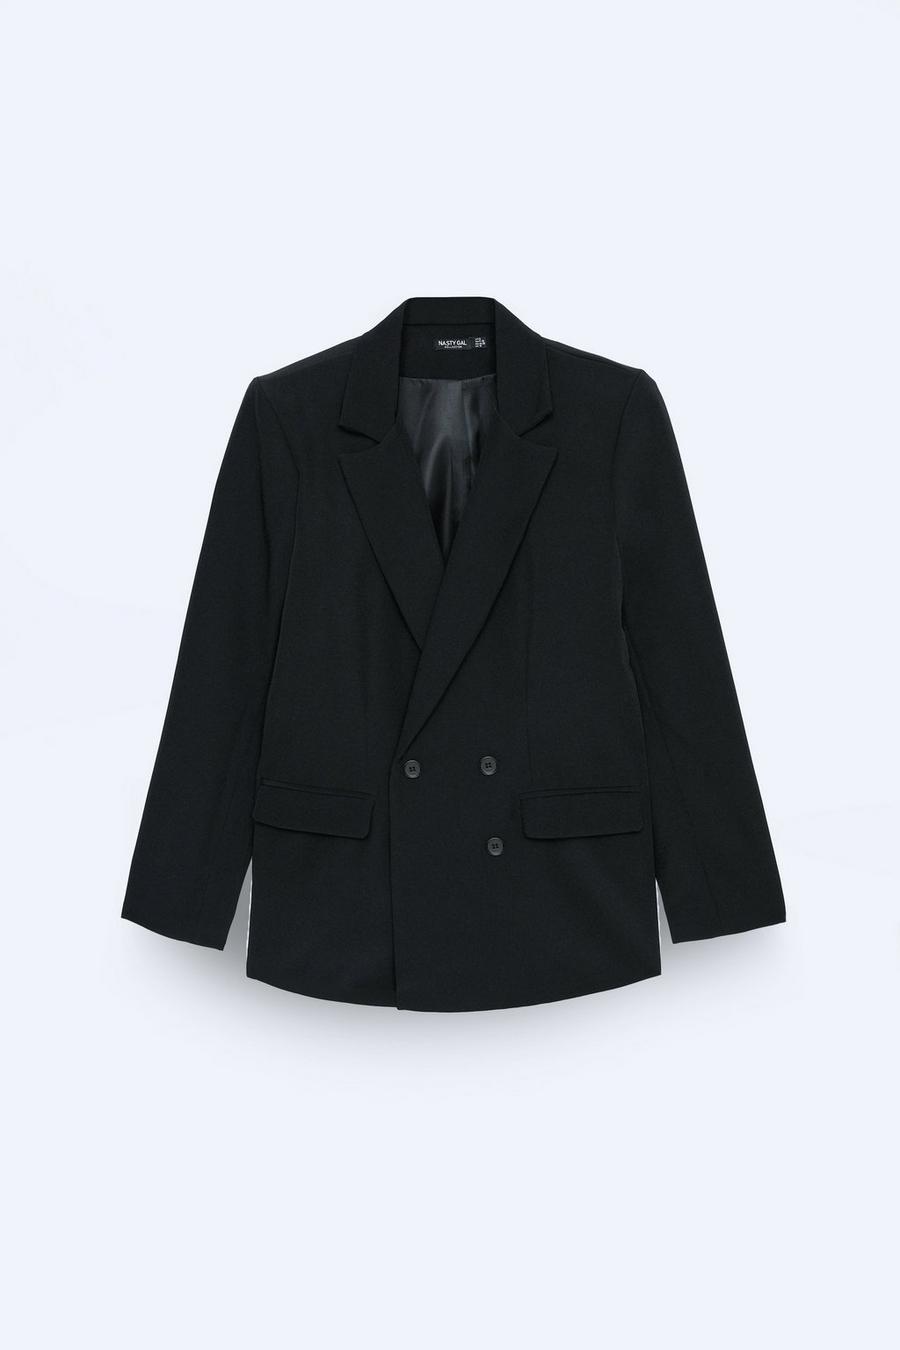 Out of Hours Oversized Double Breasted Blazer